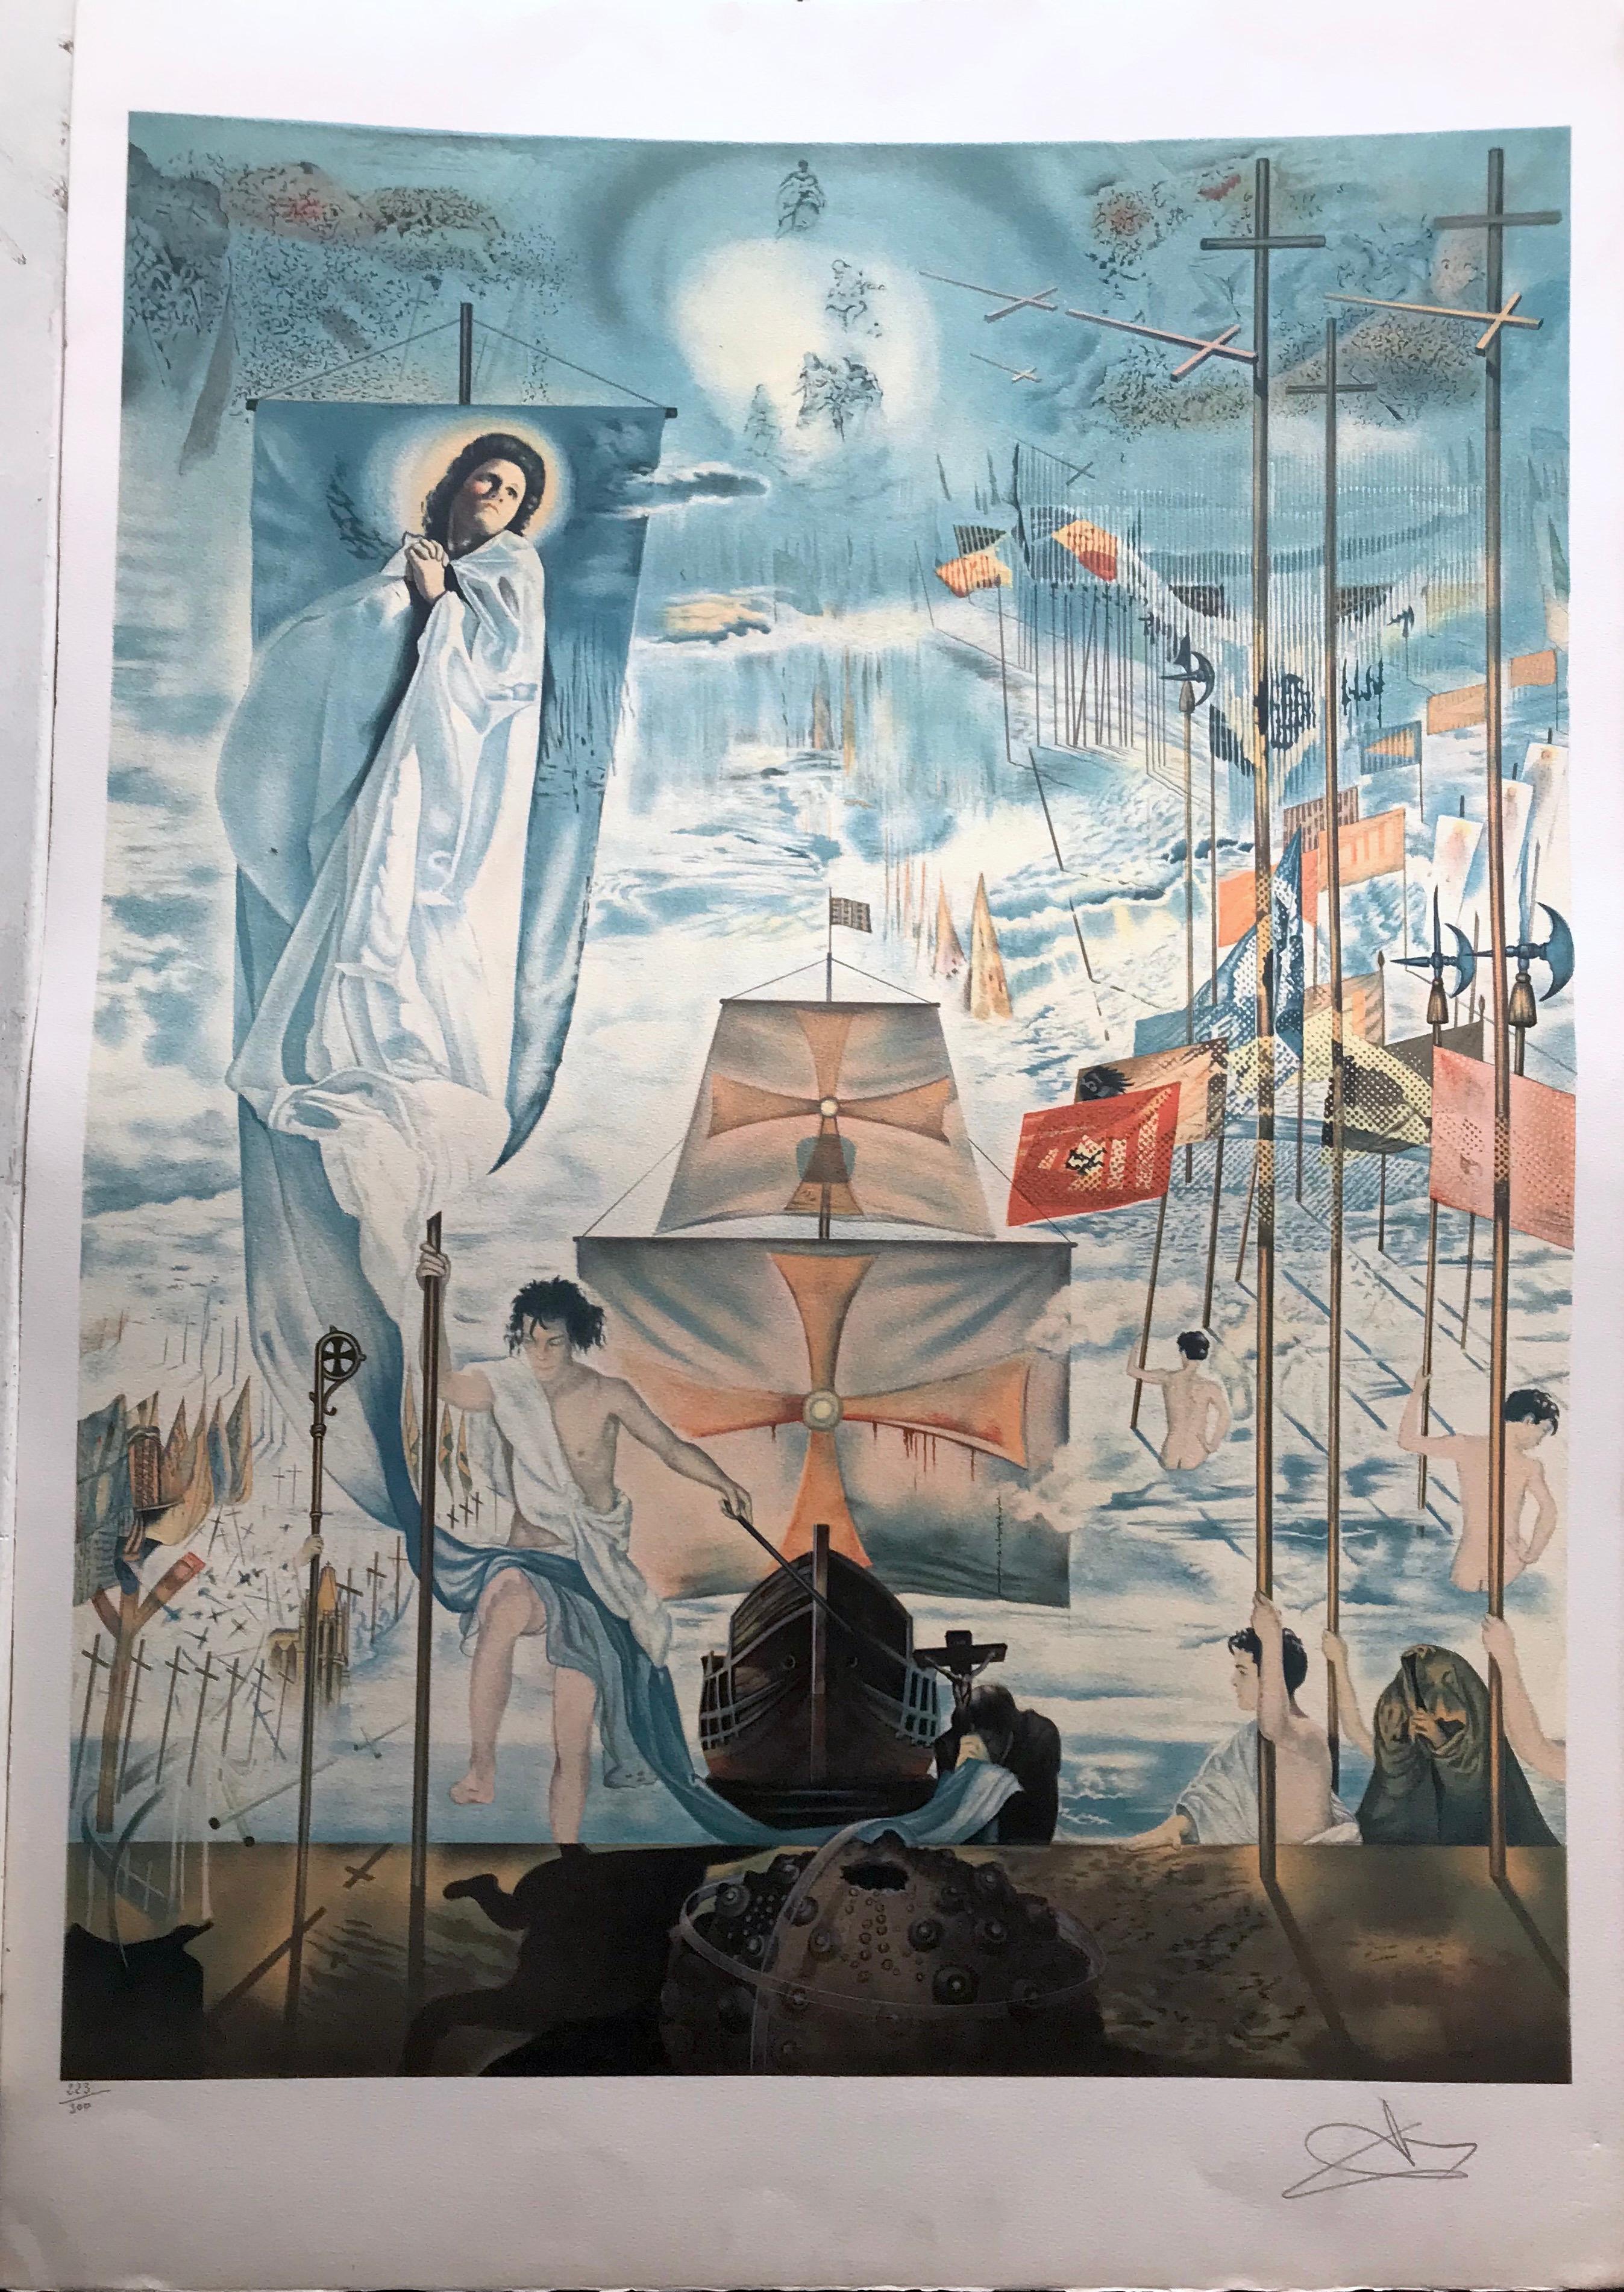 the discovery of america by christopher columbus dali